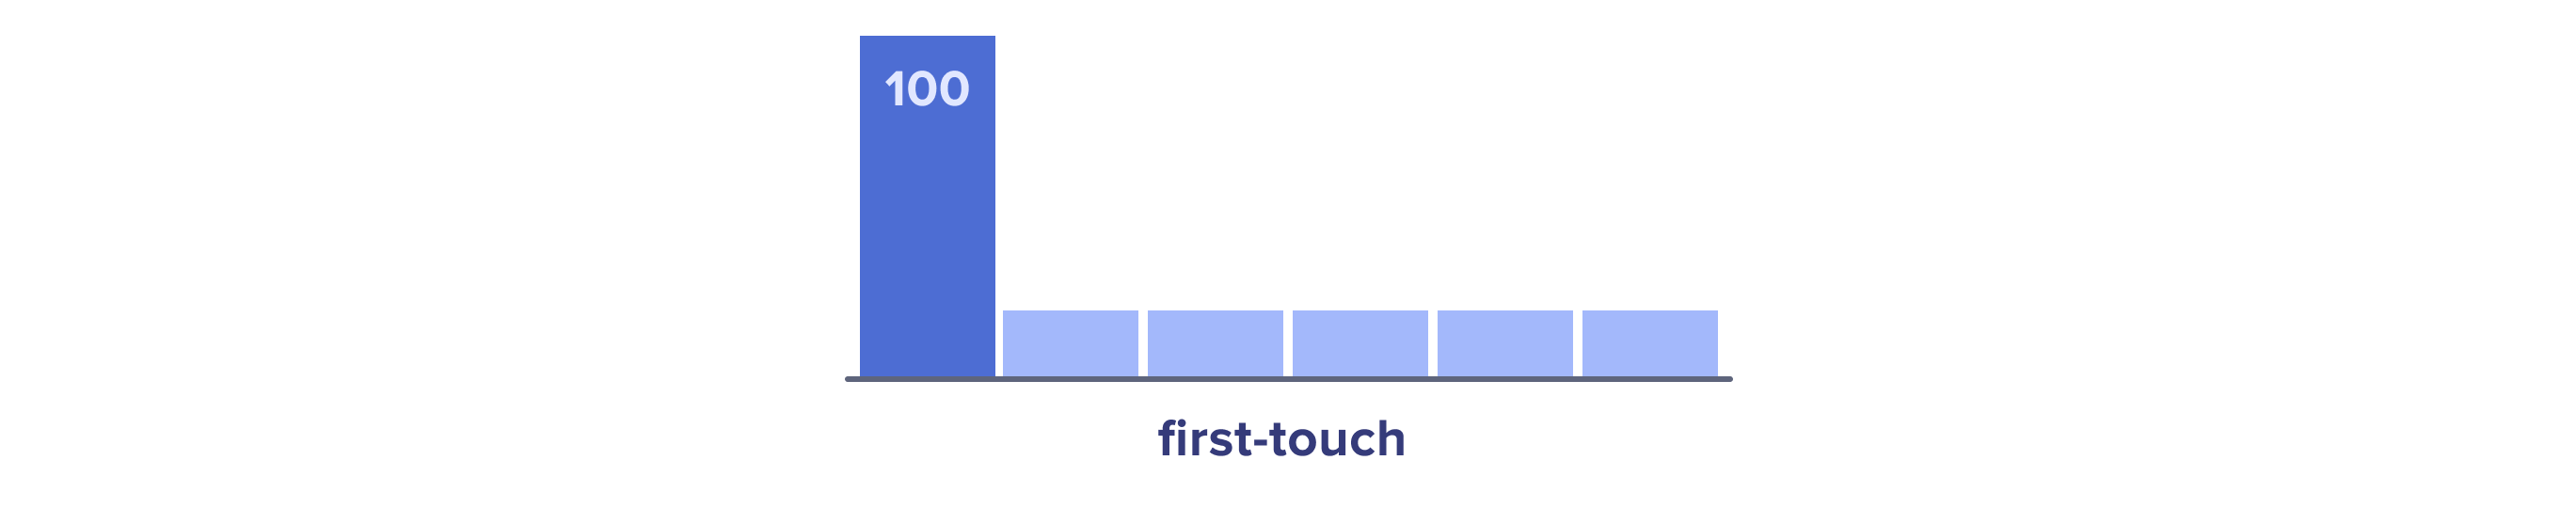 First-touch attribution model